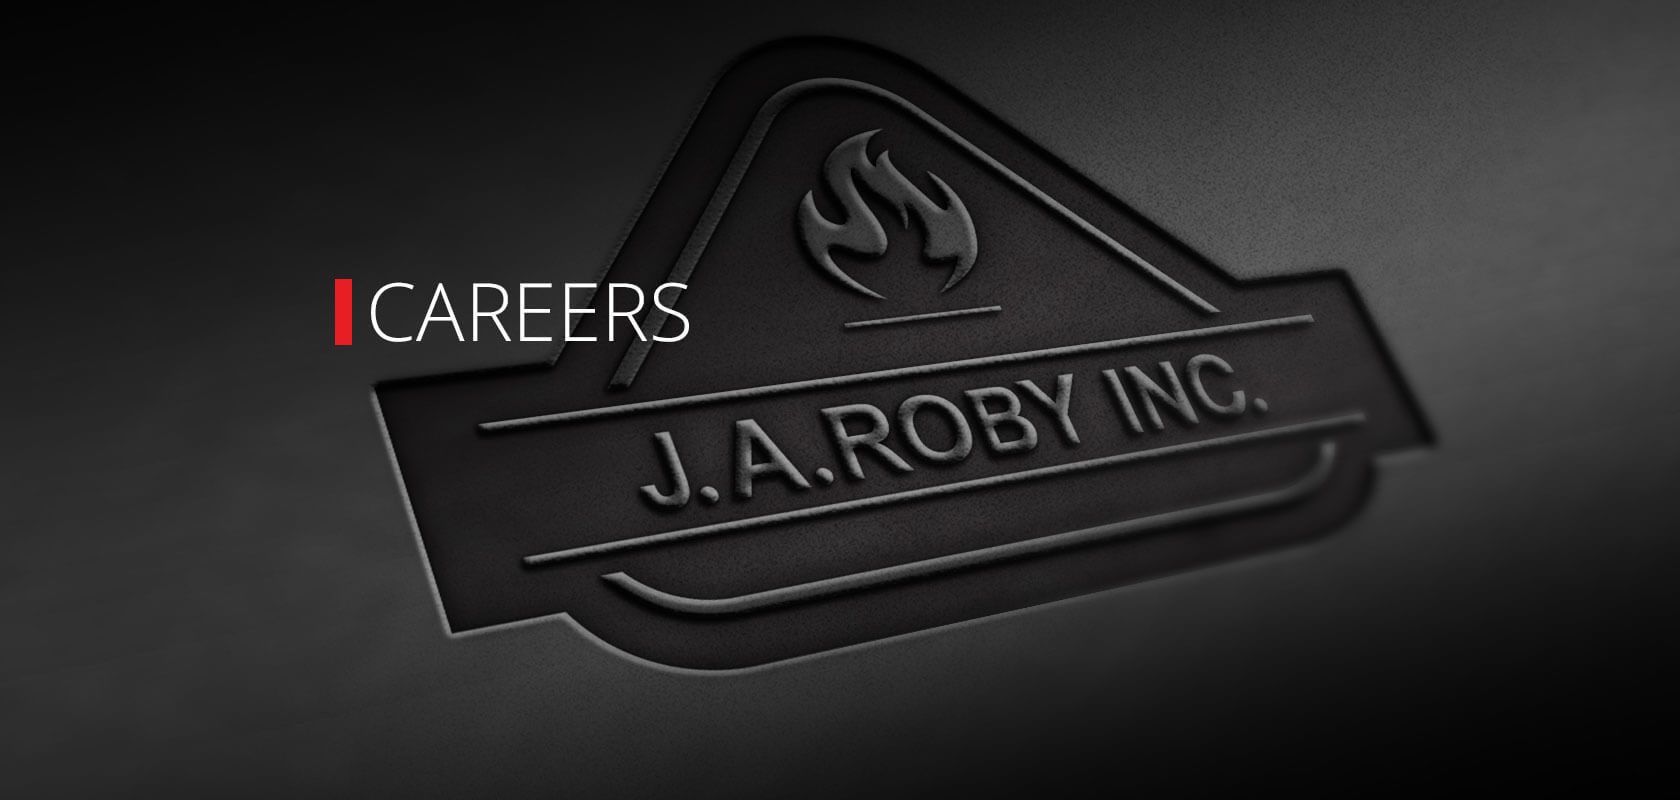 Careers J.A. Roby